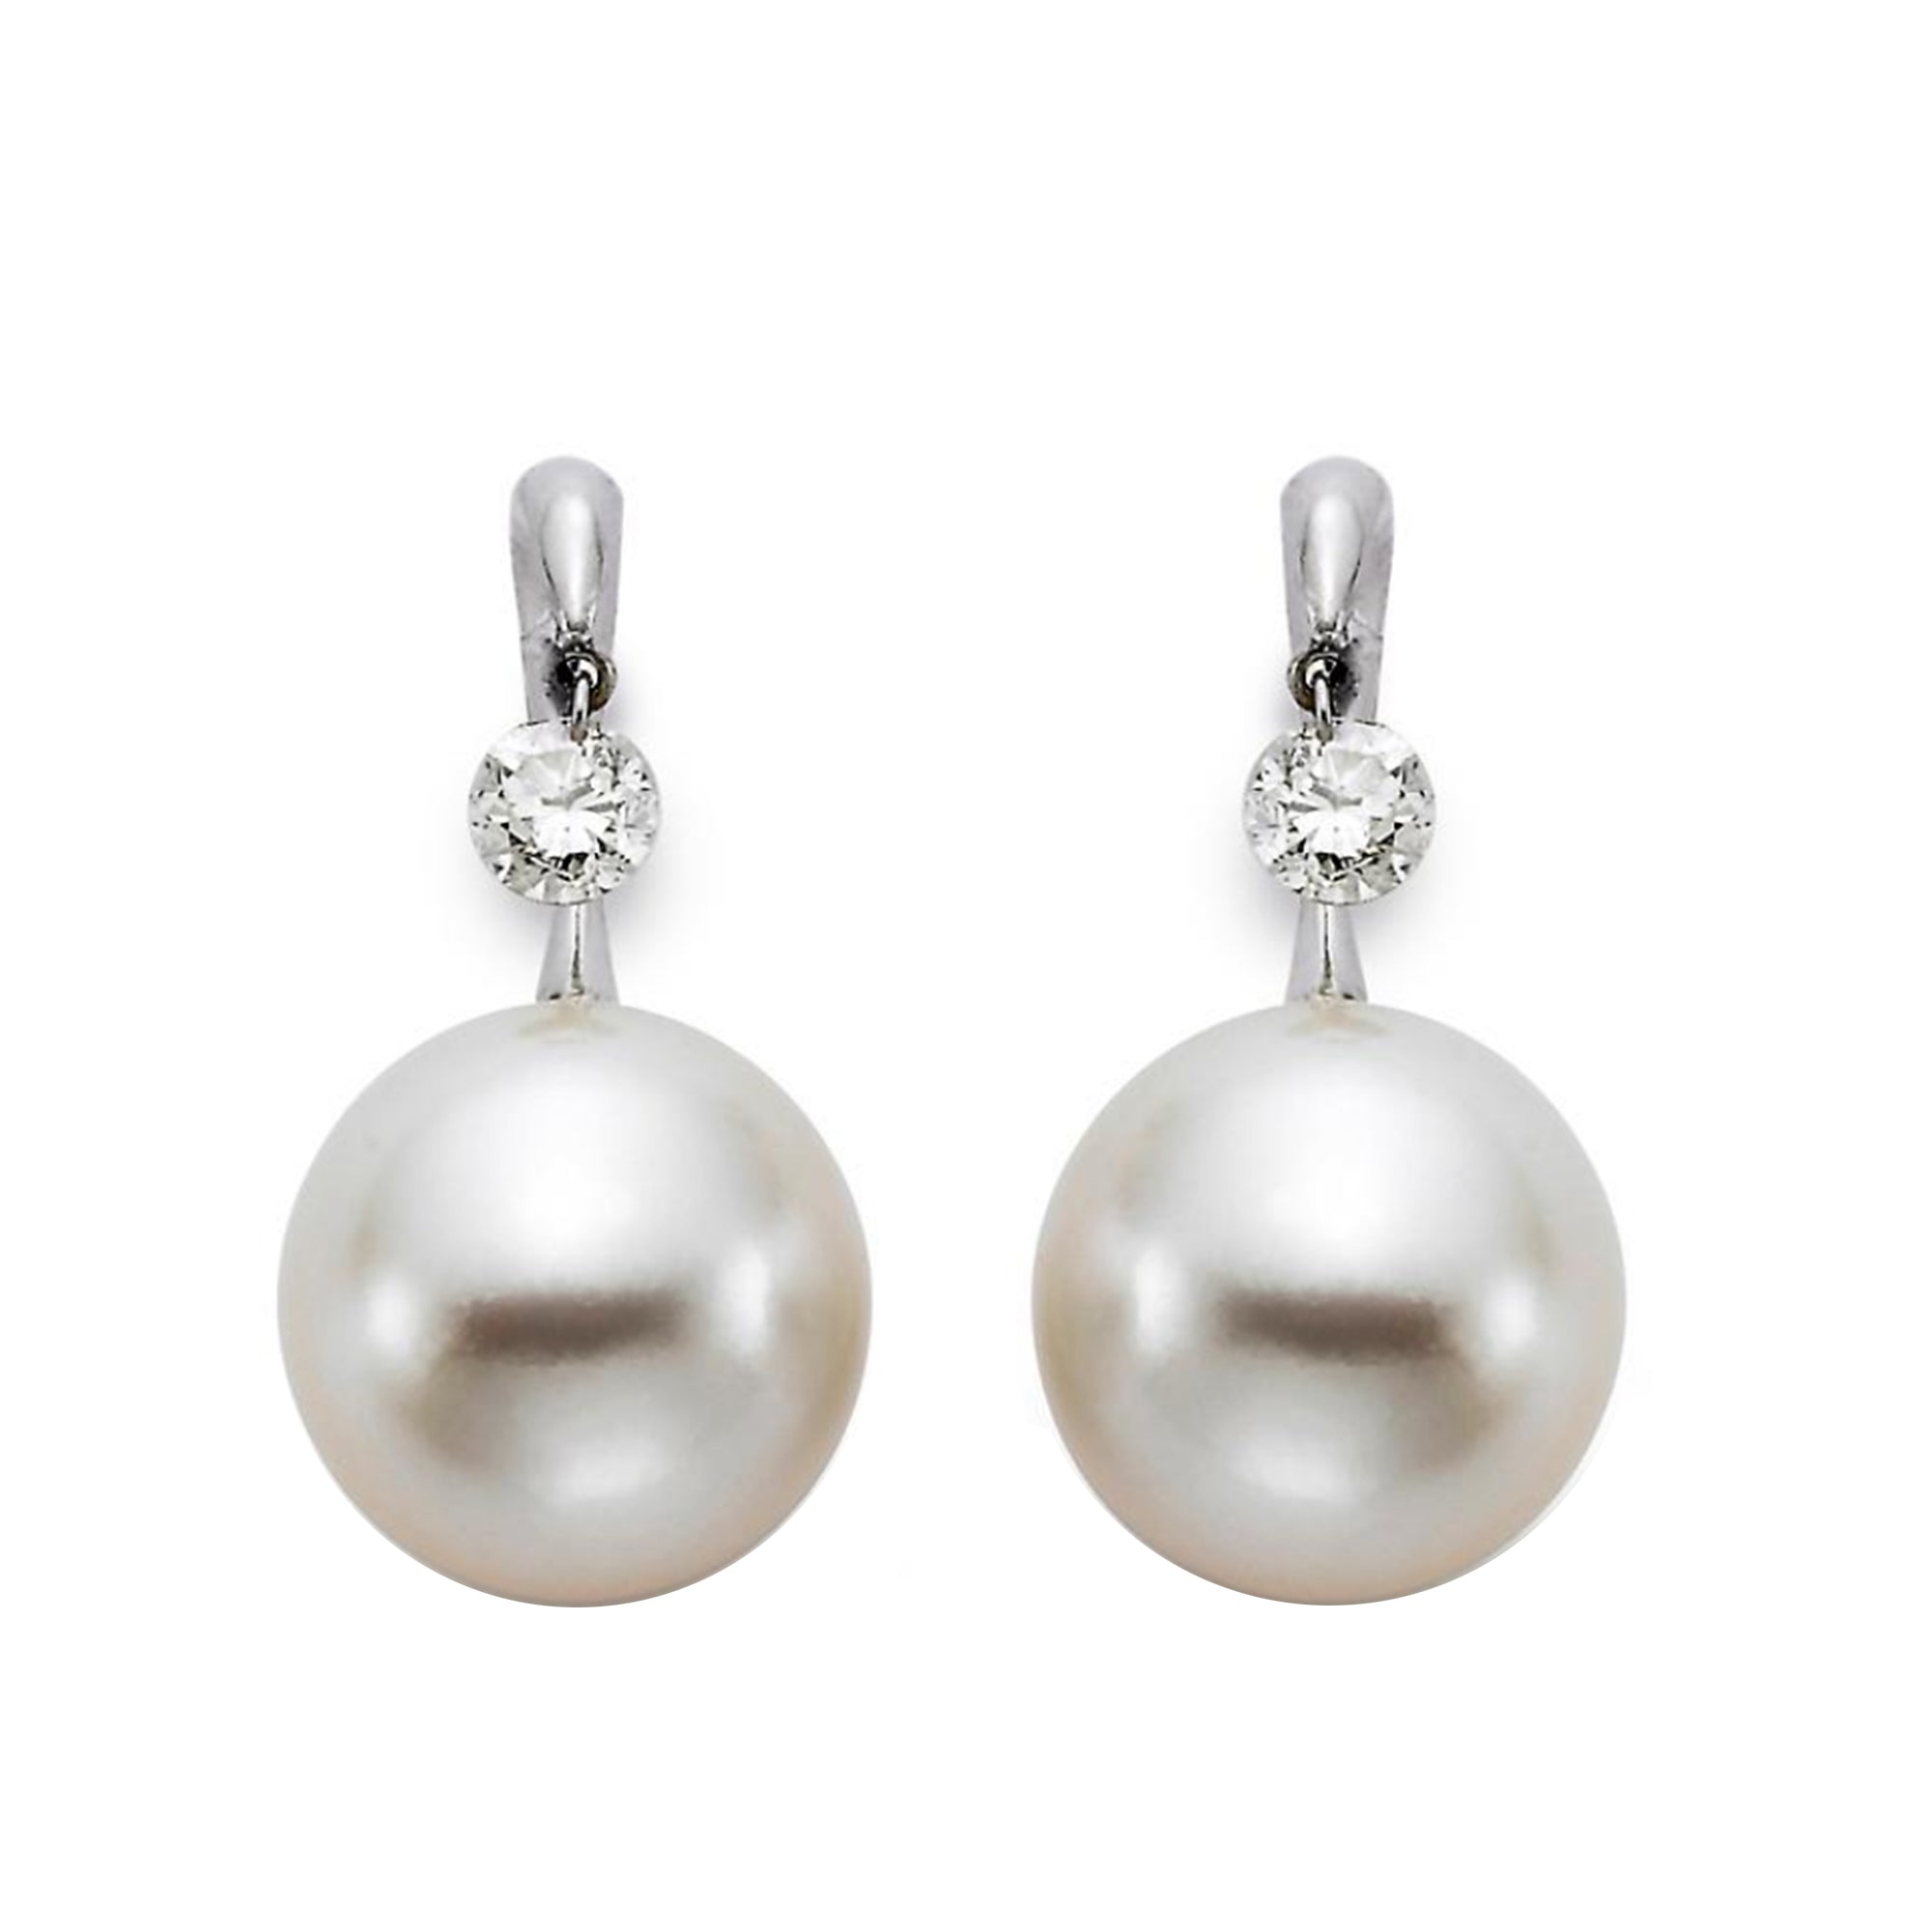 South Sea Pearl and Drilled Diamond Earrings by Mastoloni - Talisman Collection Fine Jewelers